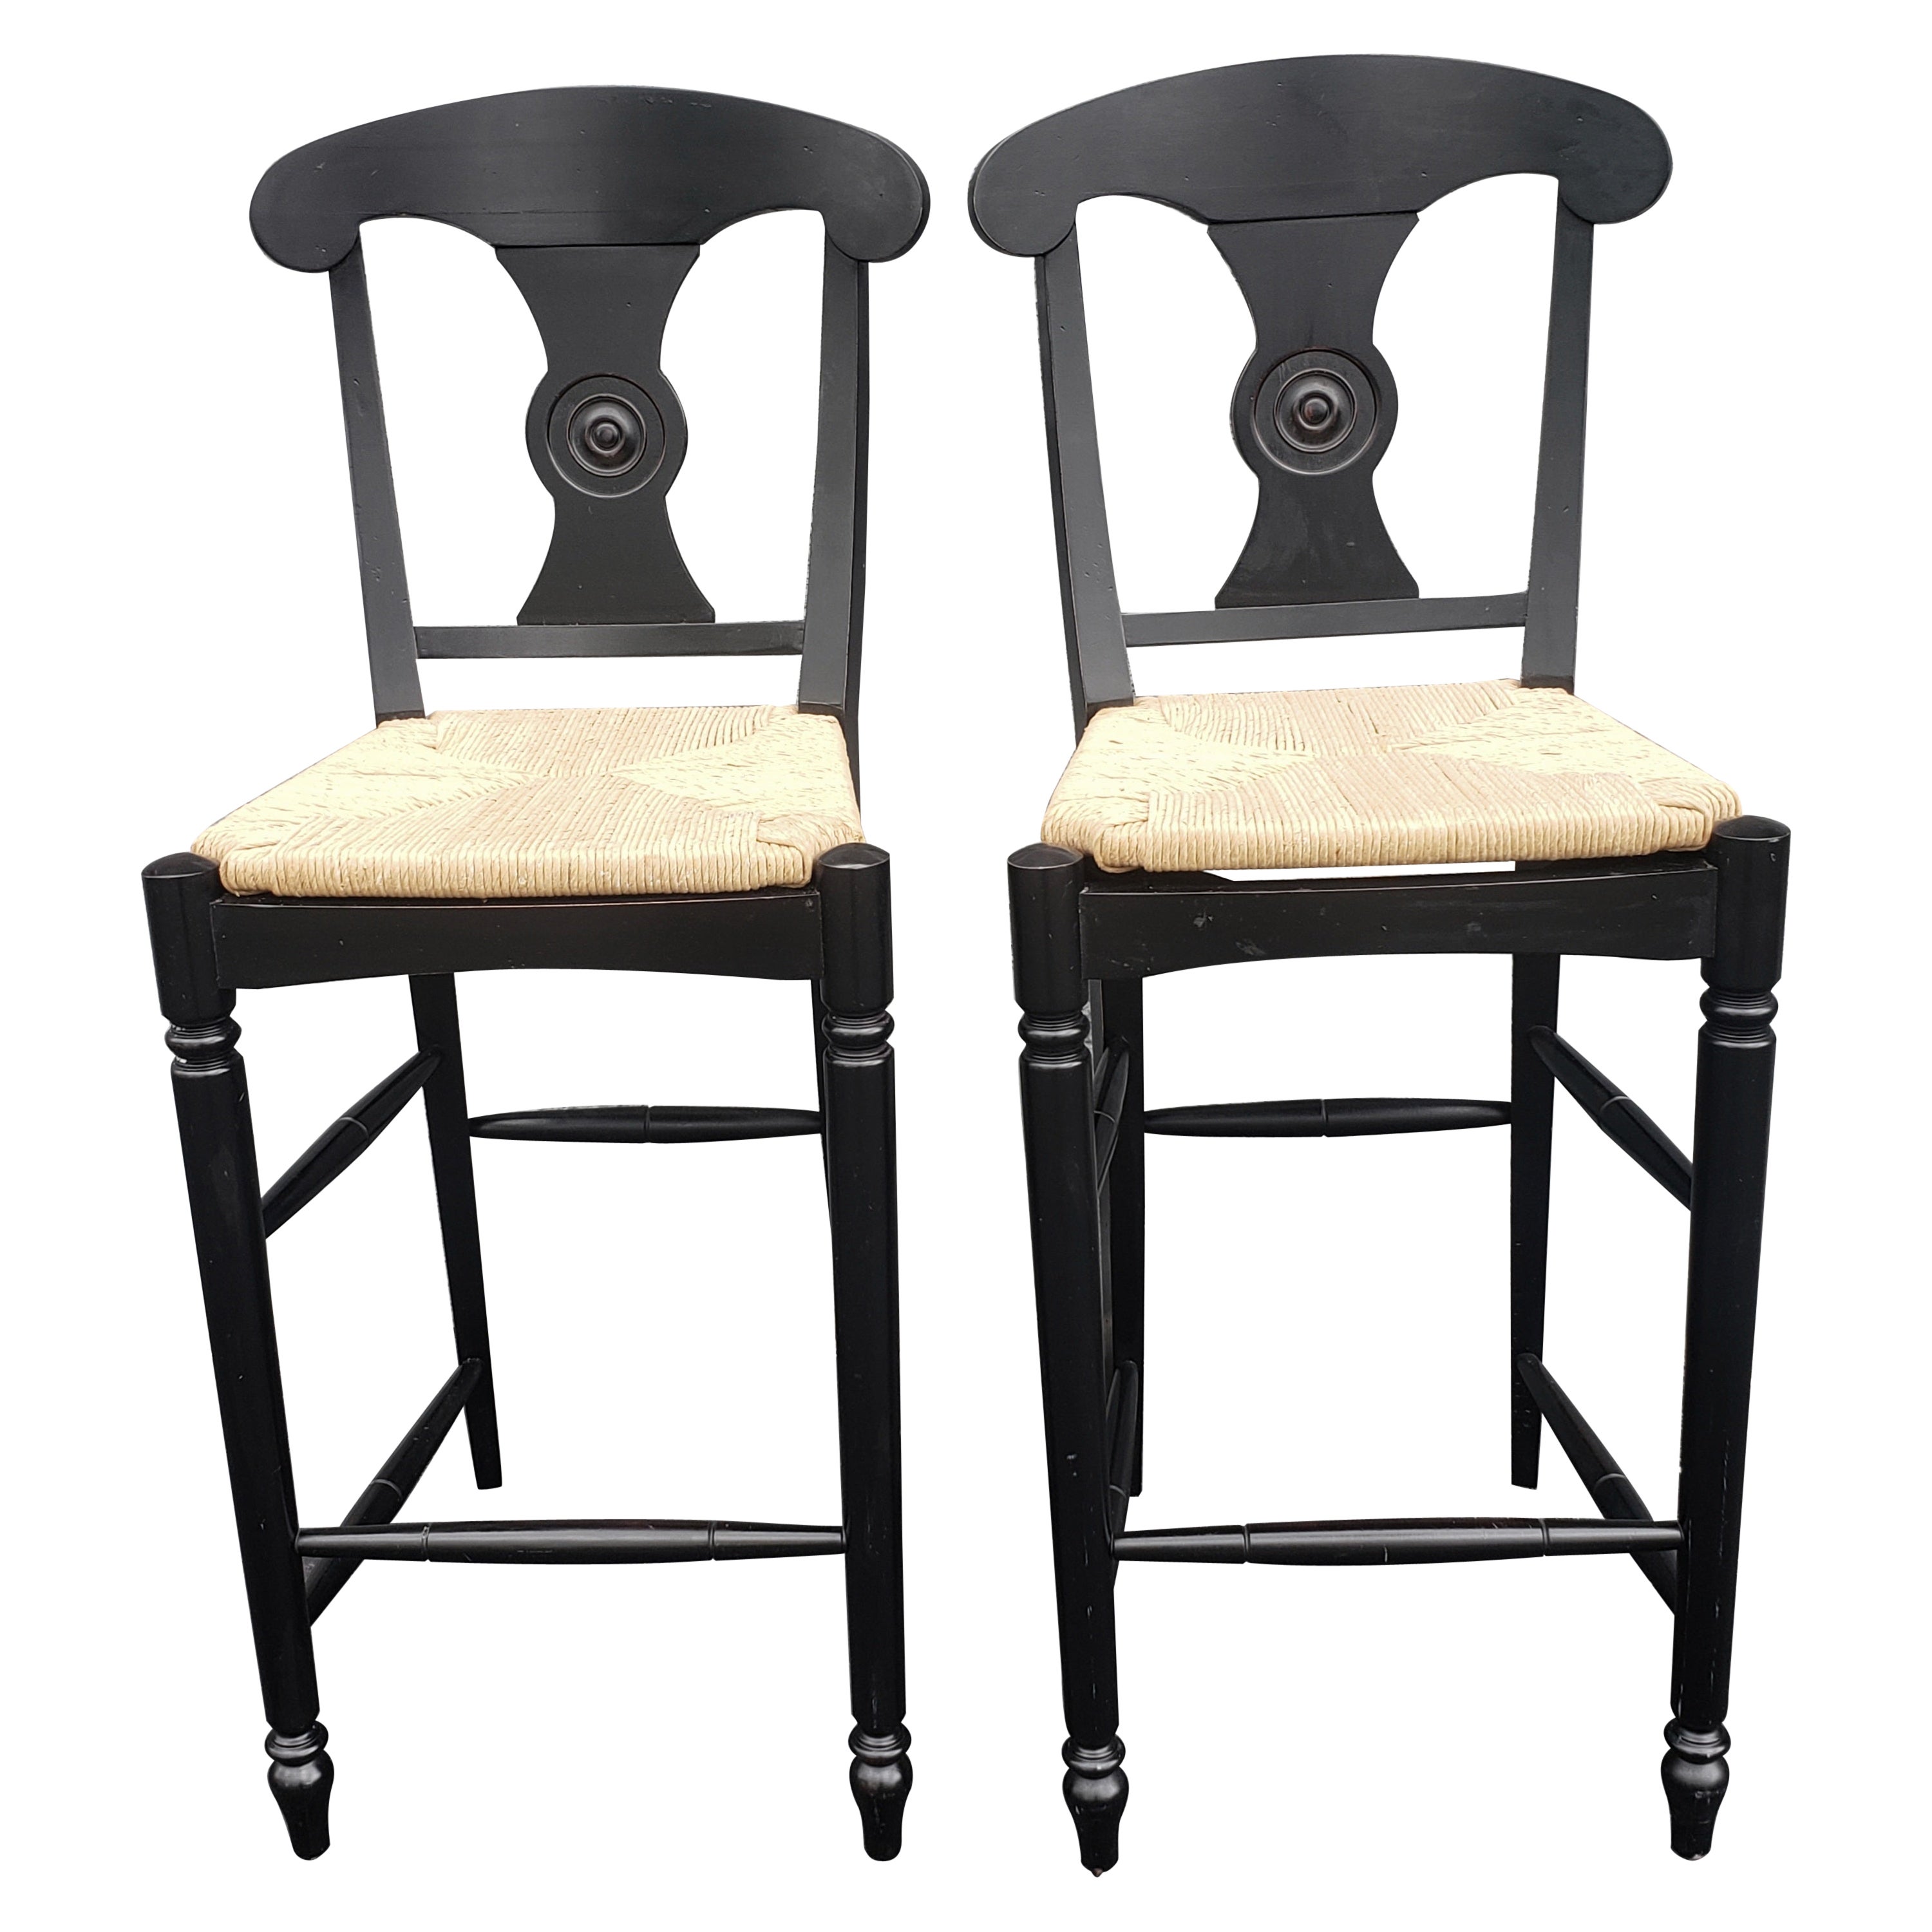 Ethan Allen Vintage French Country Rush Seat Bar Stools in Black, a Pair